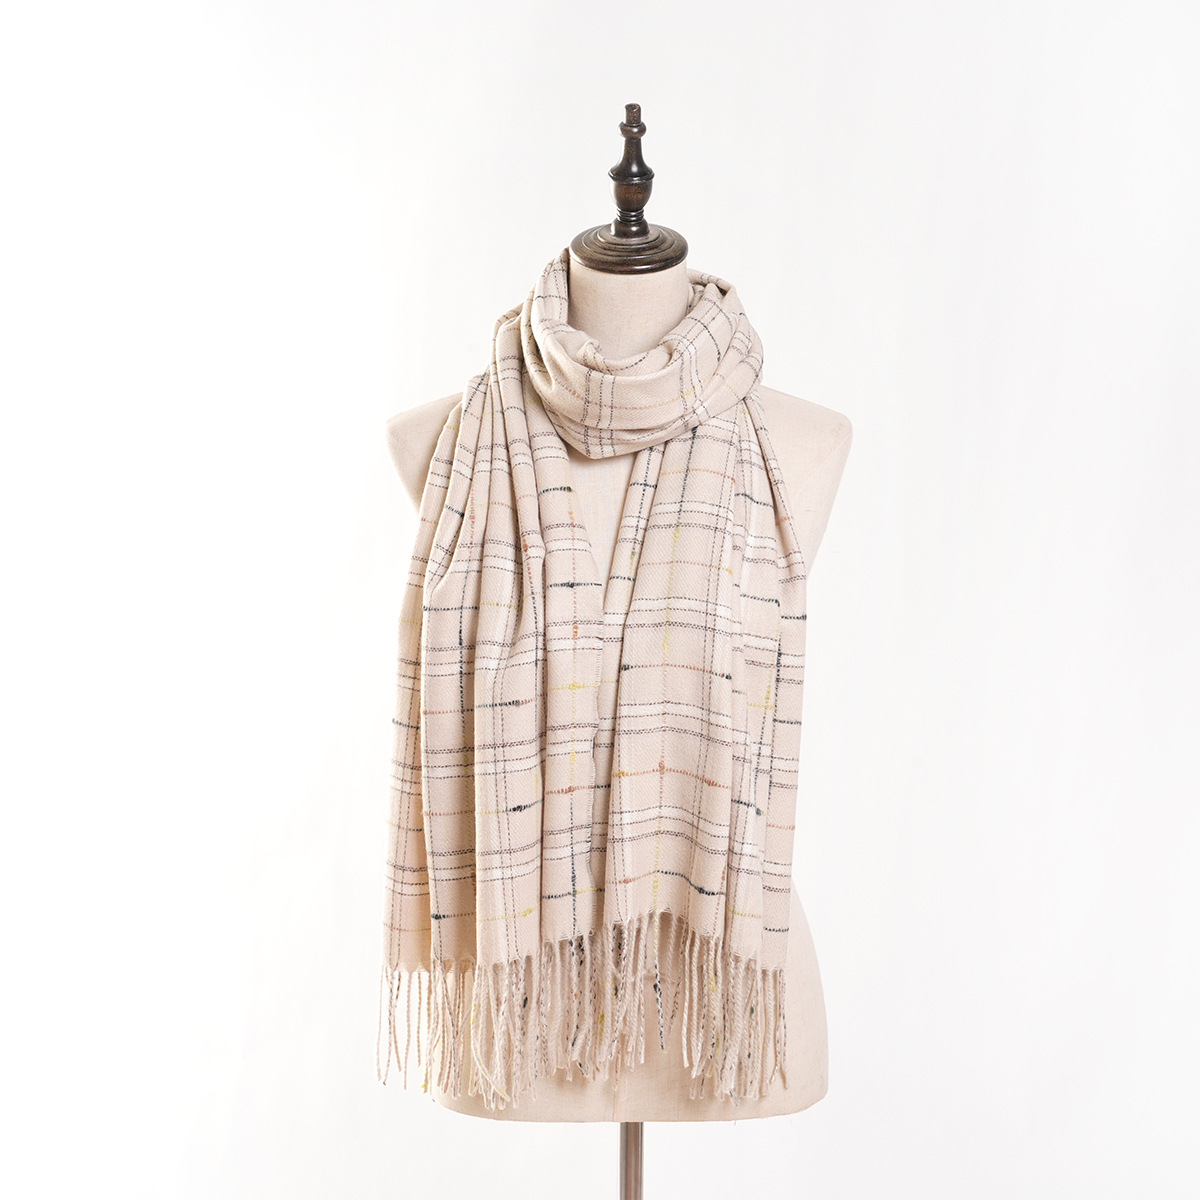 One Generation Hot-Selling New Products Cashmere-like All-Matching Striped Plaid Scarf Artistic Outer Wear Tassel Women's Scarf in Stock